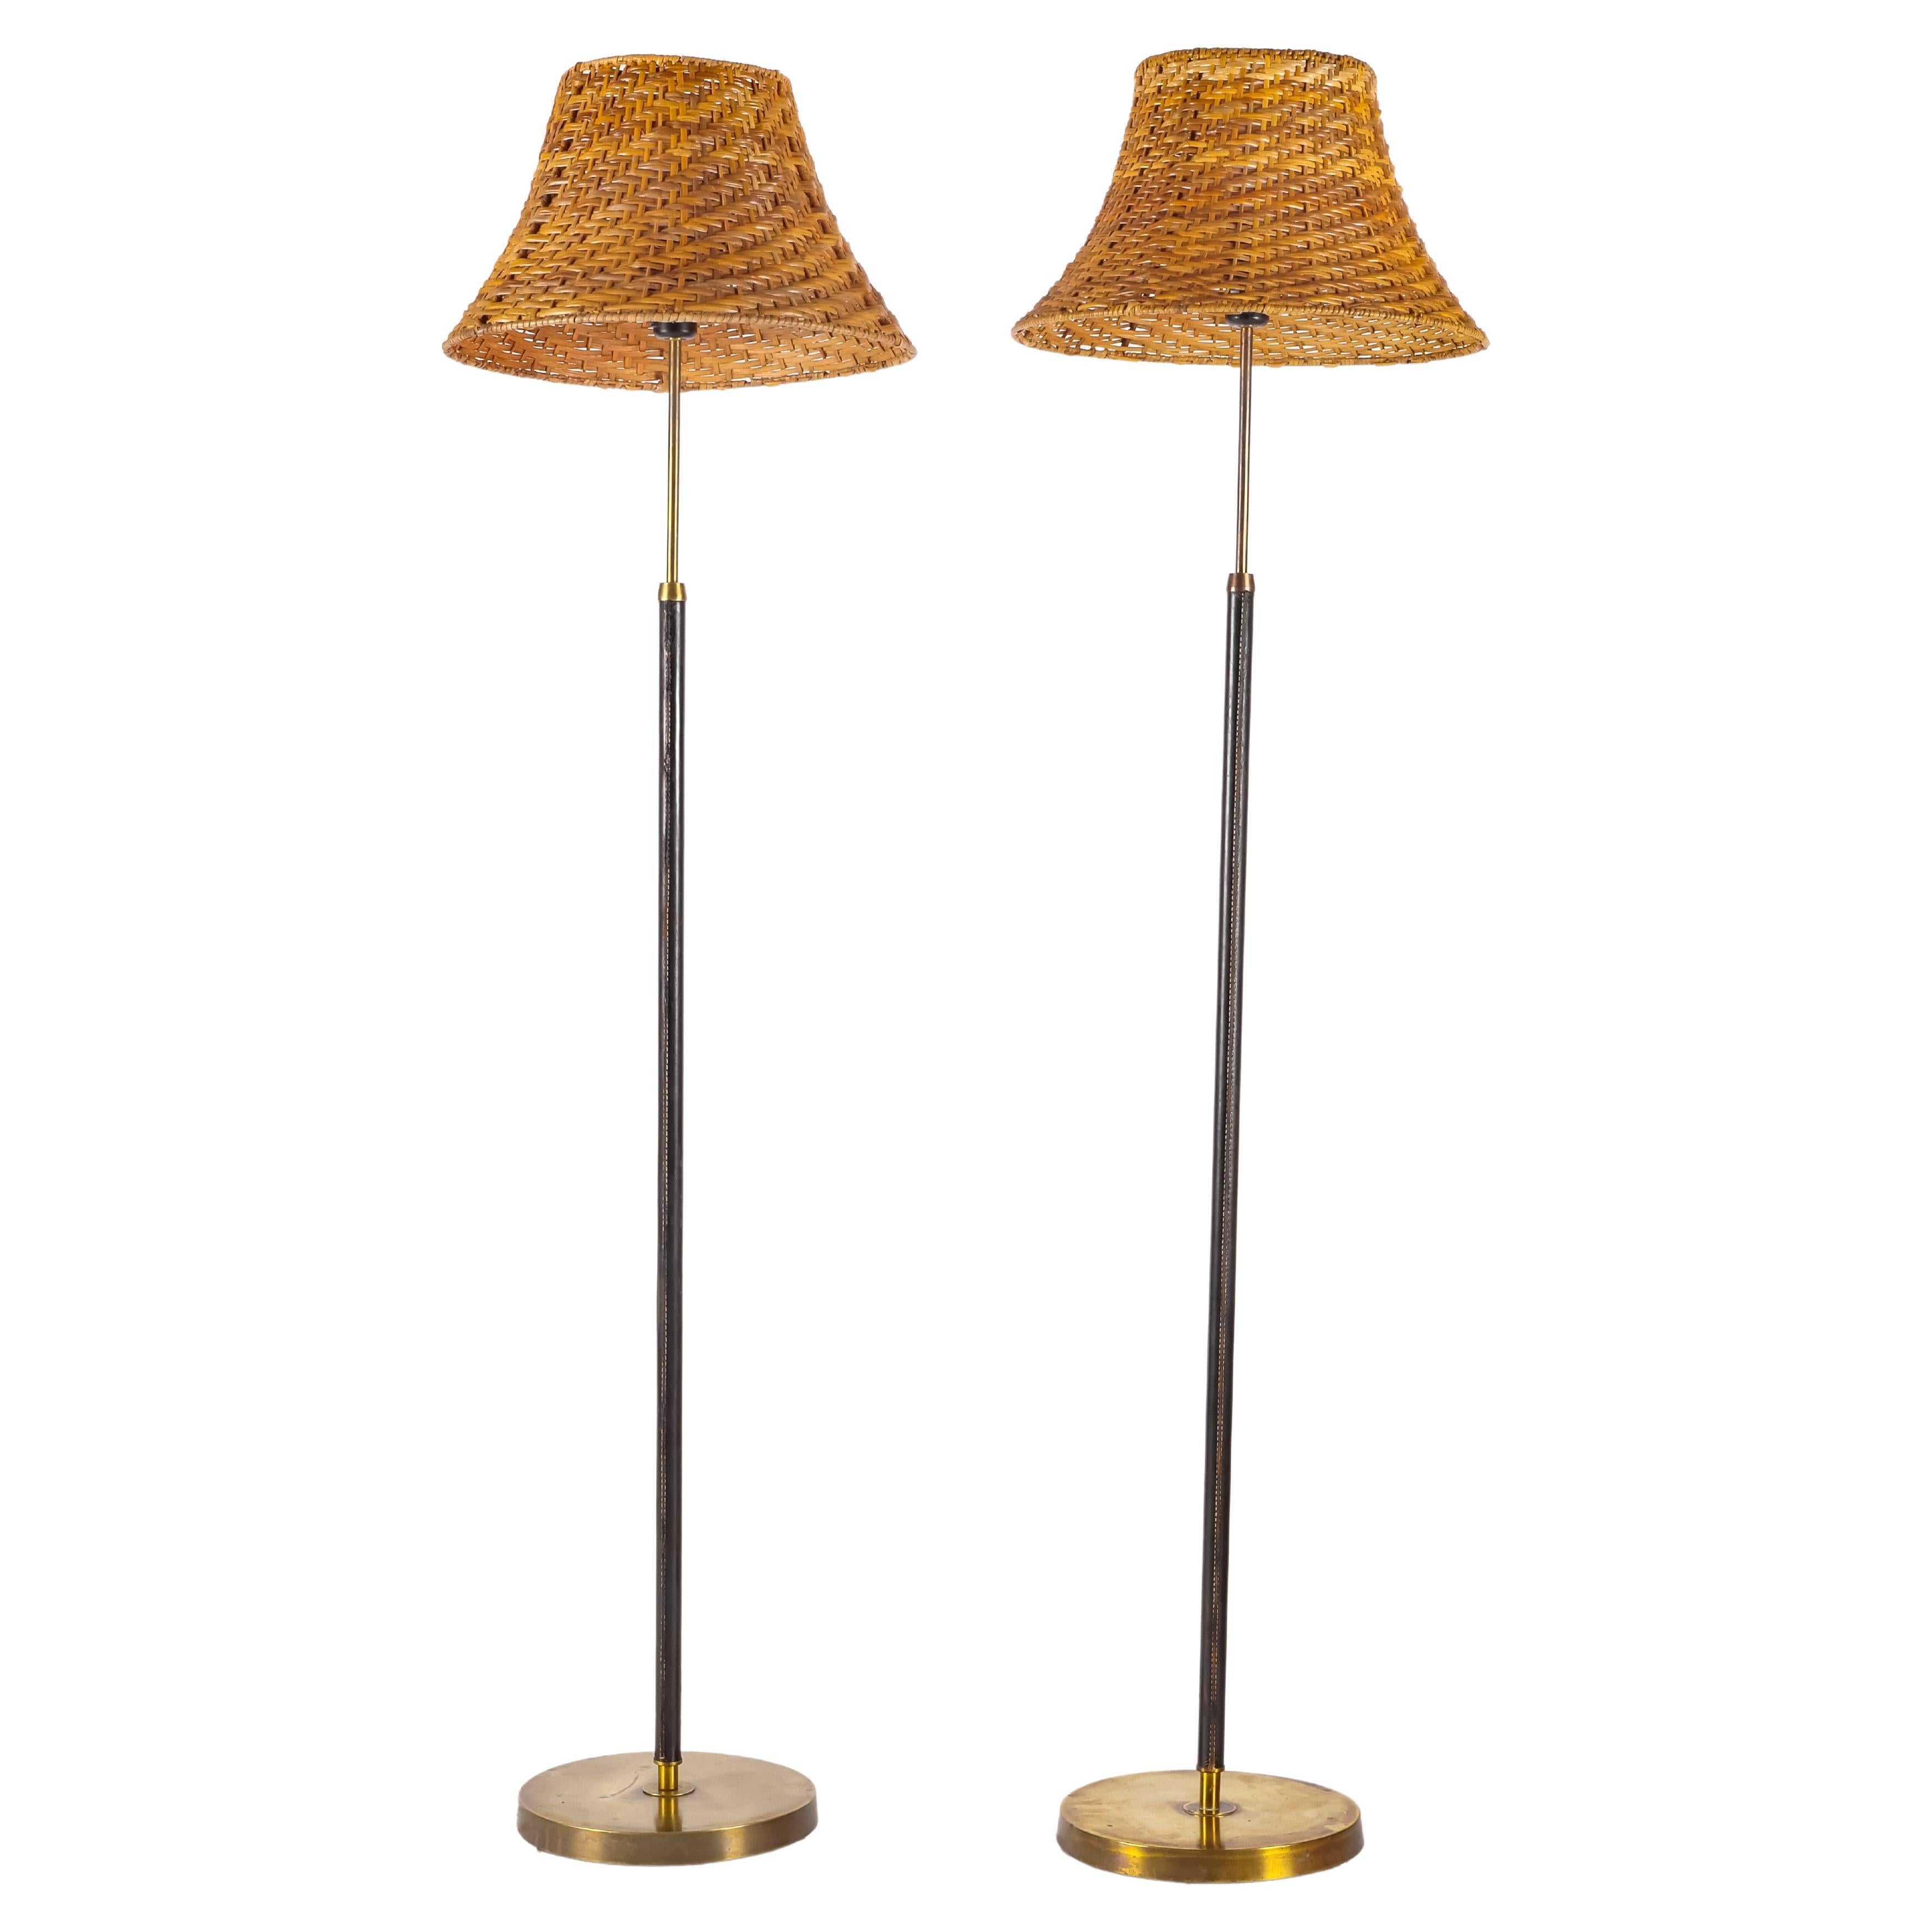 ASEA Sweden Brass, Leather & Rattan Floor Lamps, A Pair For Sale